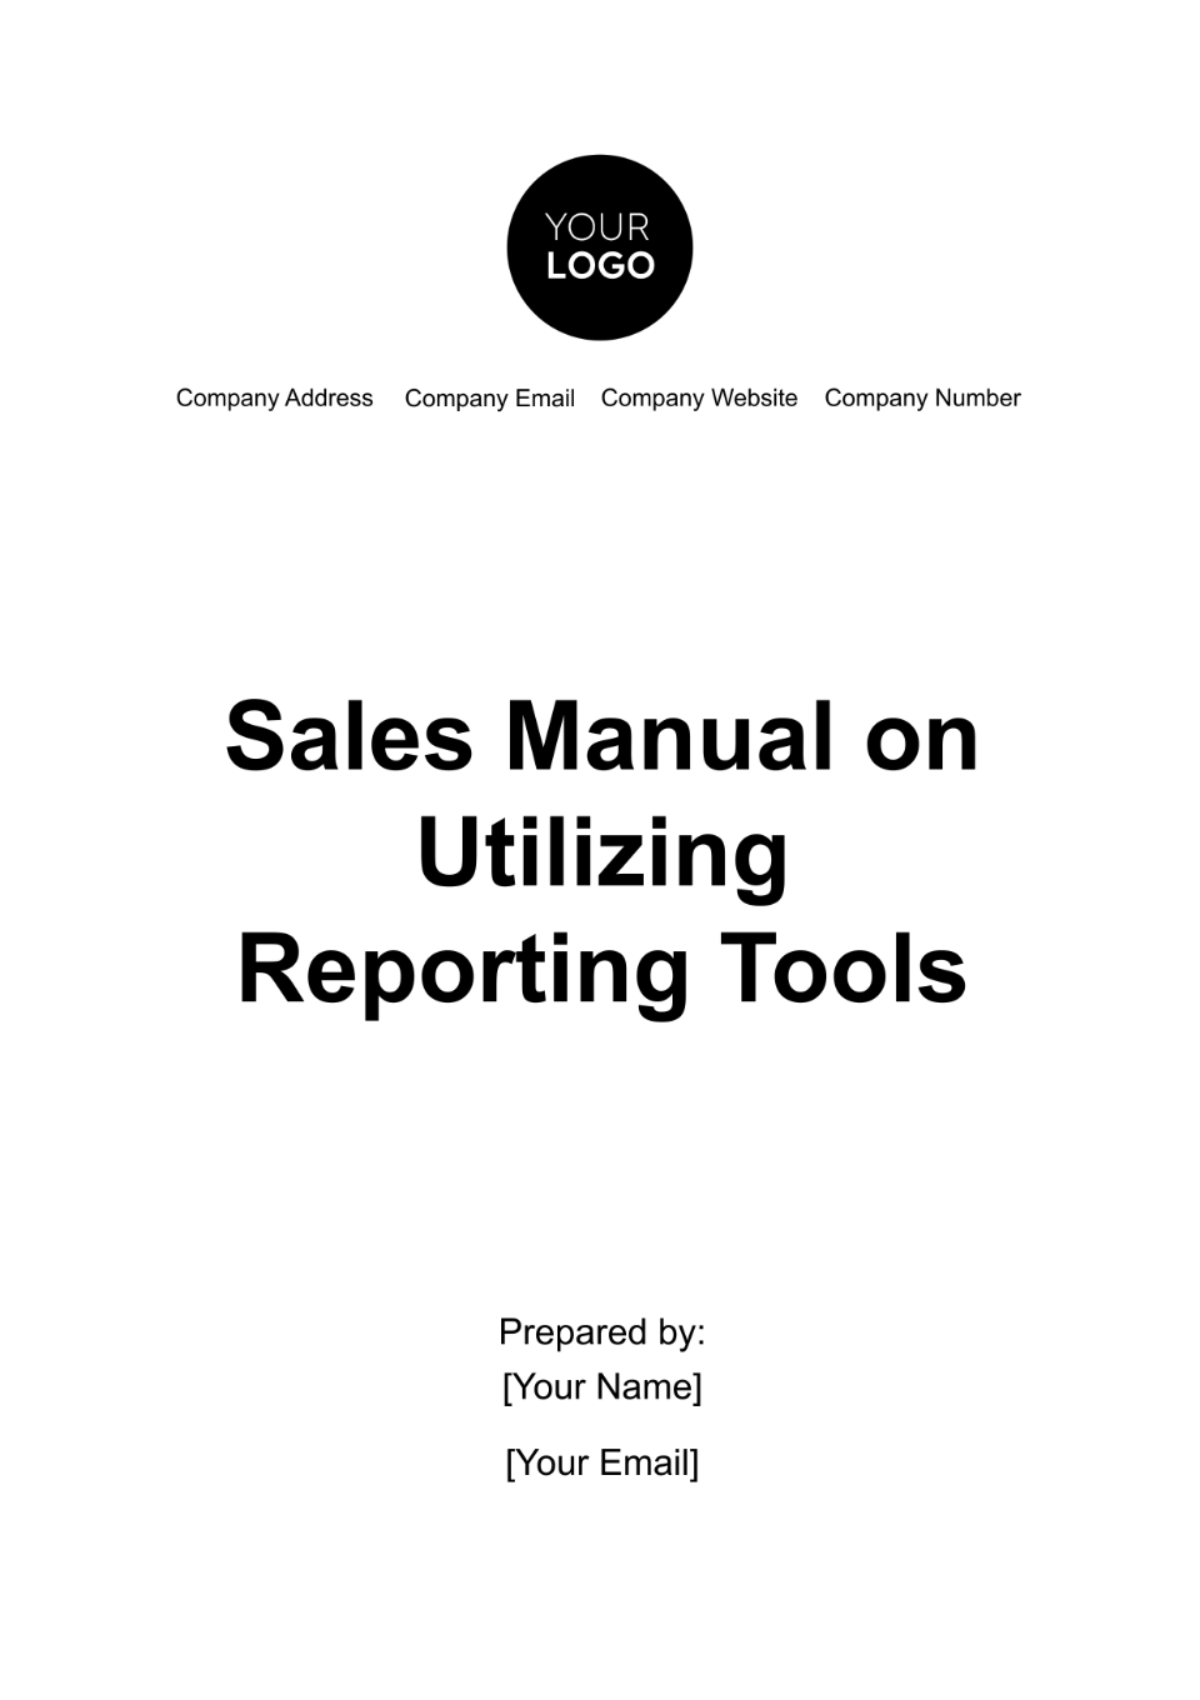 Sales Manual on Utilizing Reporting Tools Template